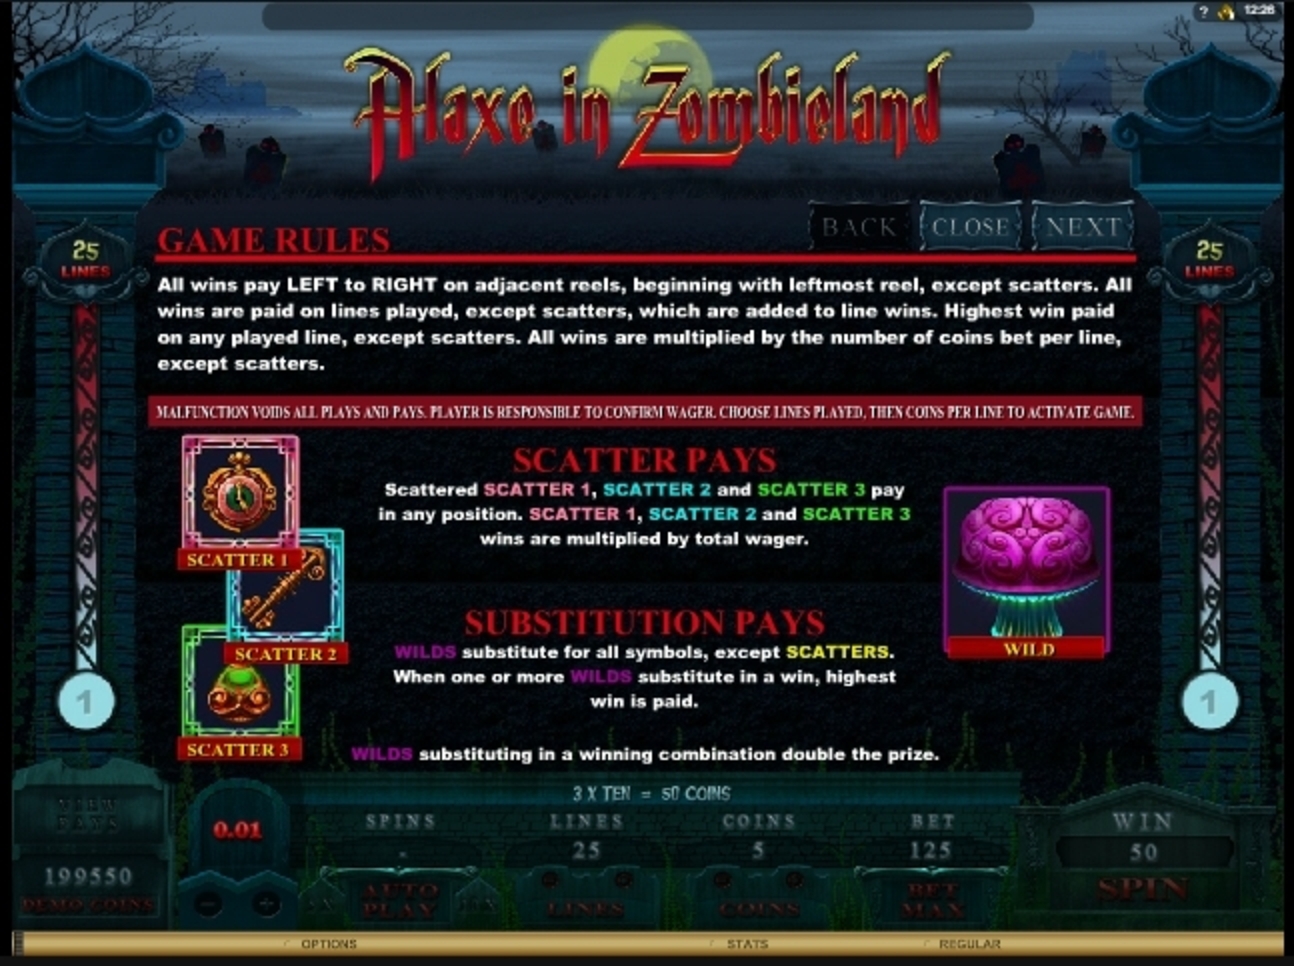 Info of Alaxe in Zombieland Slot Game by Microgaming